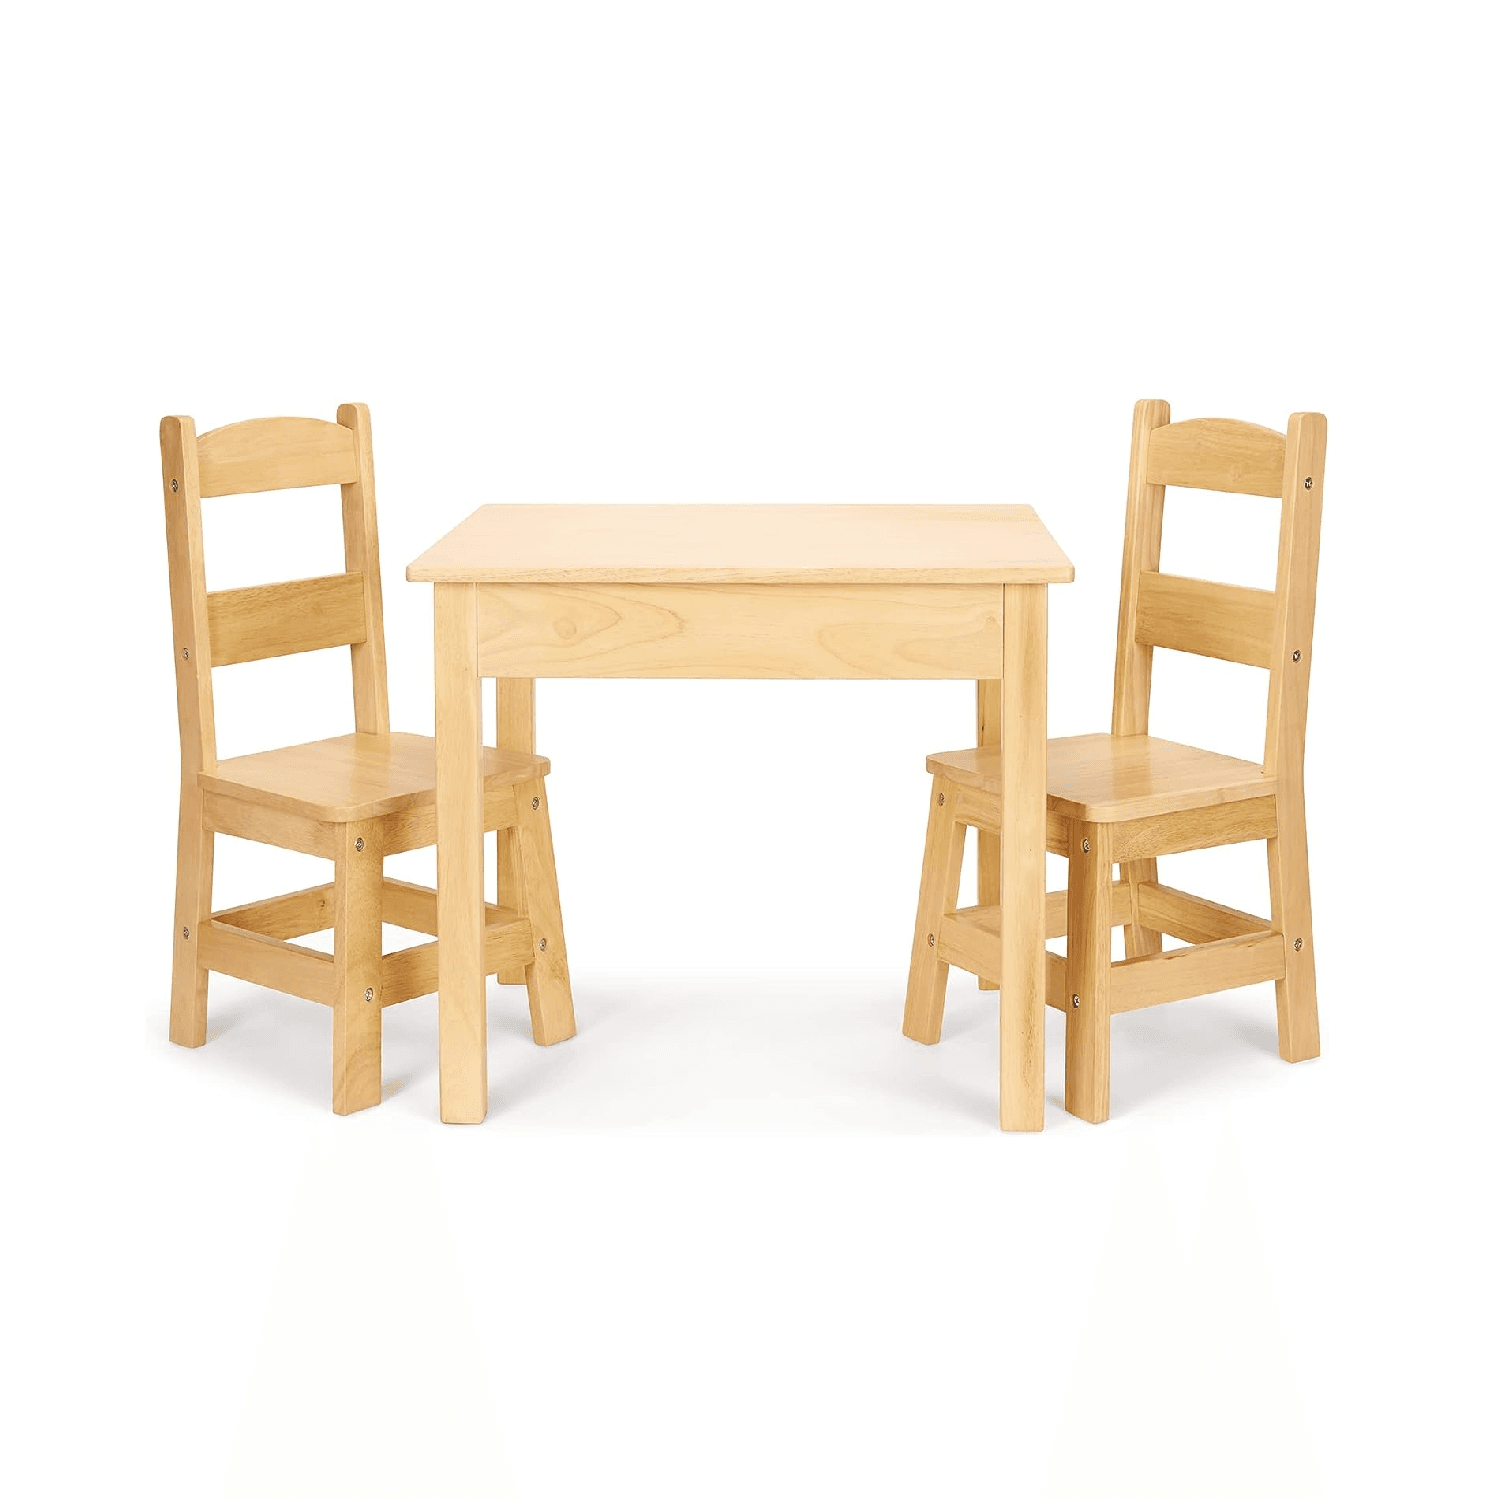 Montessori Melissa & Doug Solid Wood Table and 2 Chairs Set Blonde